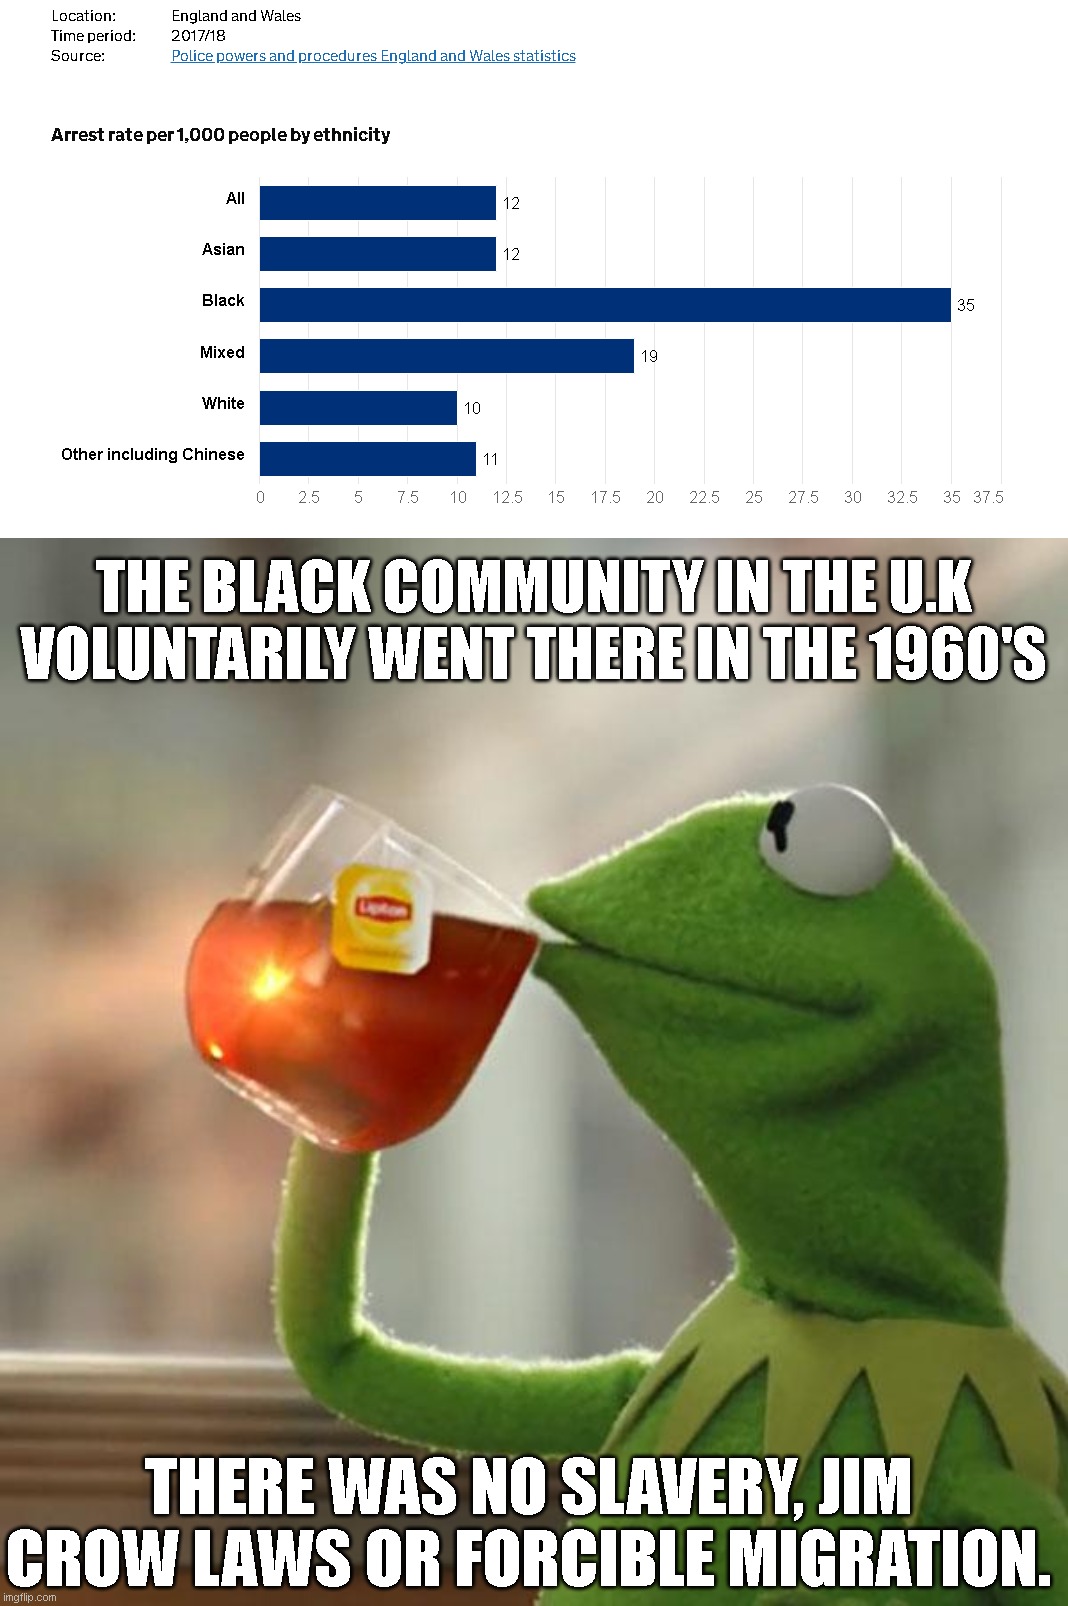 THE BLACK COMMUNITY IN THE U.K VOLUNTARILY WENT THERE IN THE 1960'S; THERE WAS NO SLAVERY, JIM CROW LAWS OR FORCIBLE MIGRATION. | image tagged in memes,but that's none of my business | made w/ Imgflip meme maker